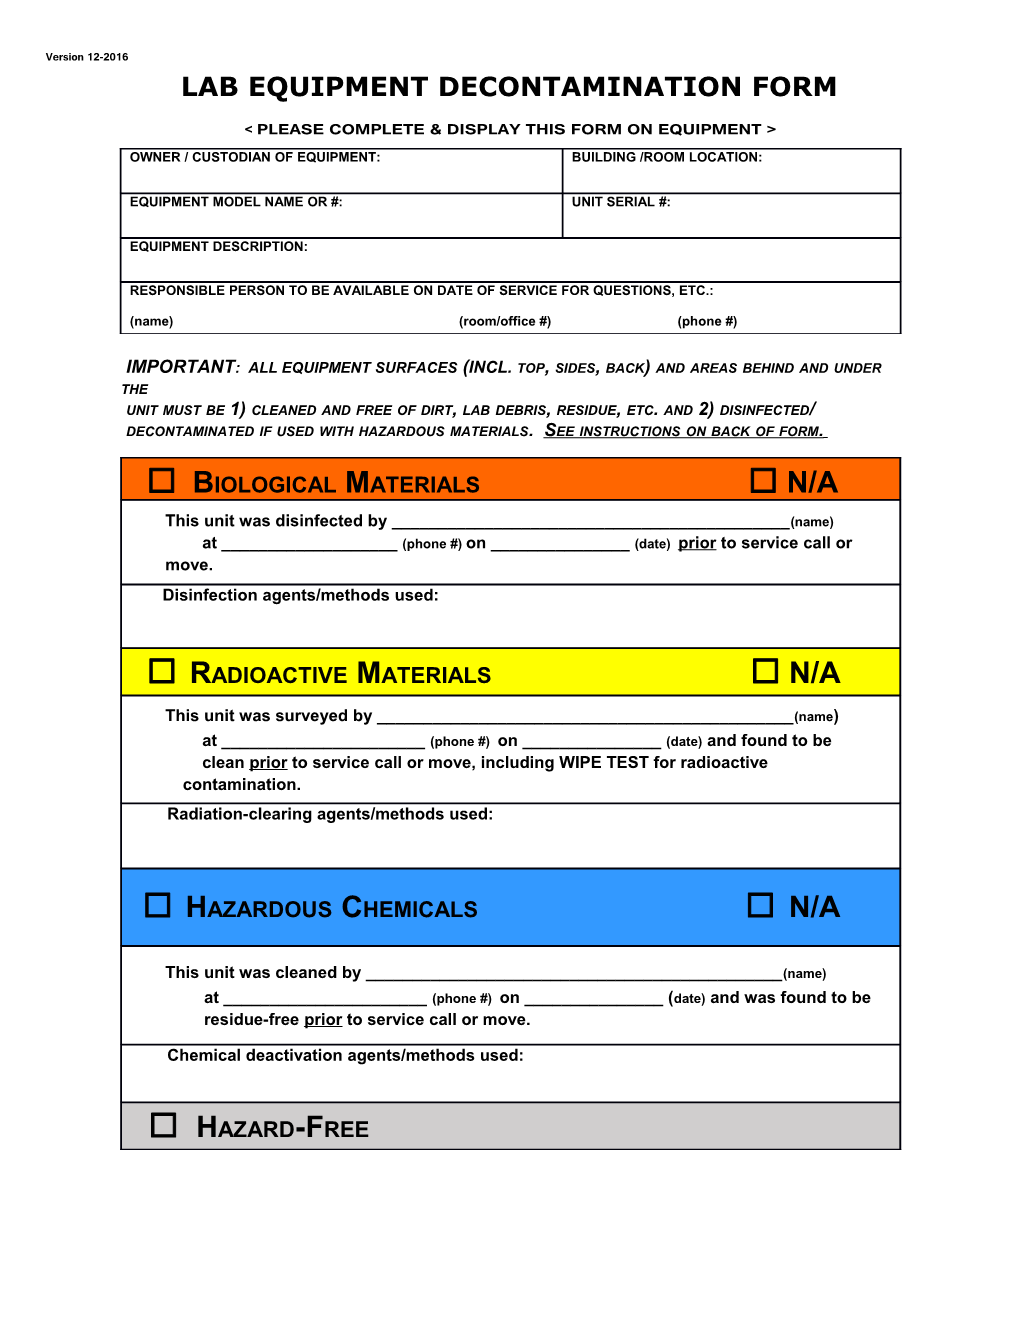 Please Complete & Display This Form on Equipment